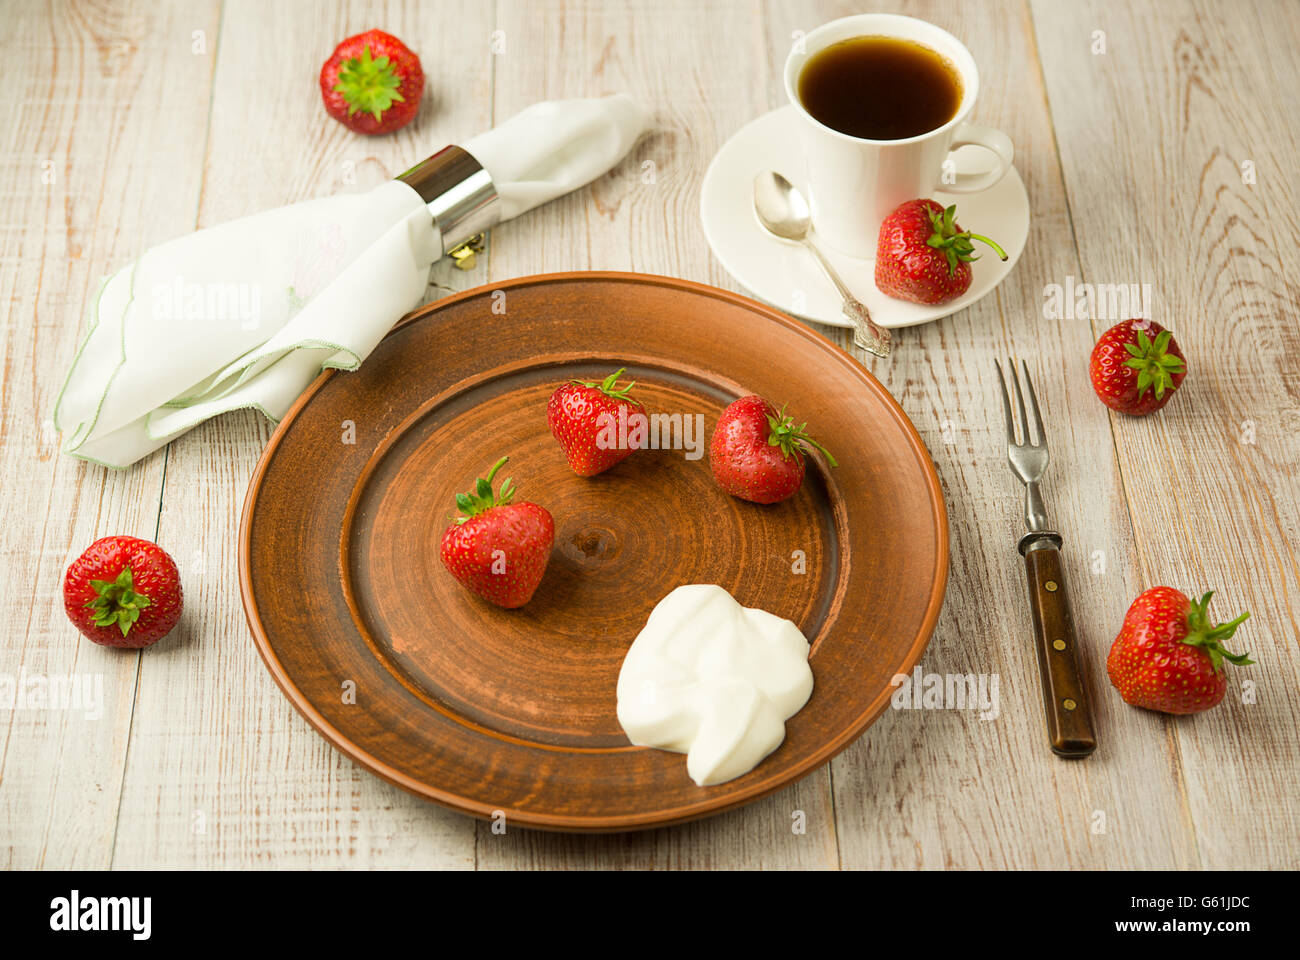 Ripe red strawberries on a brown plate Stock Photo